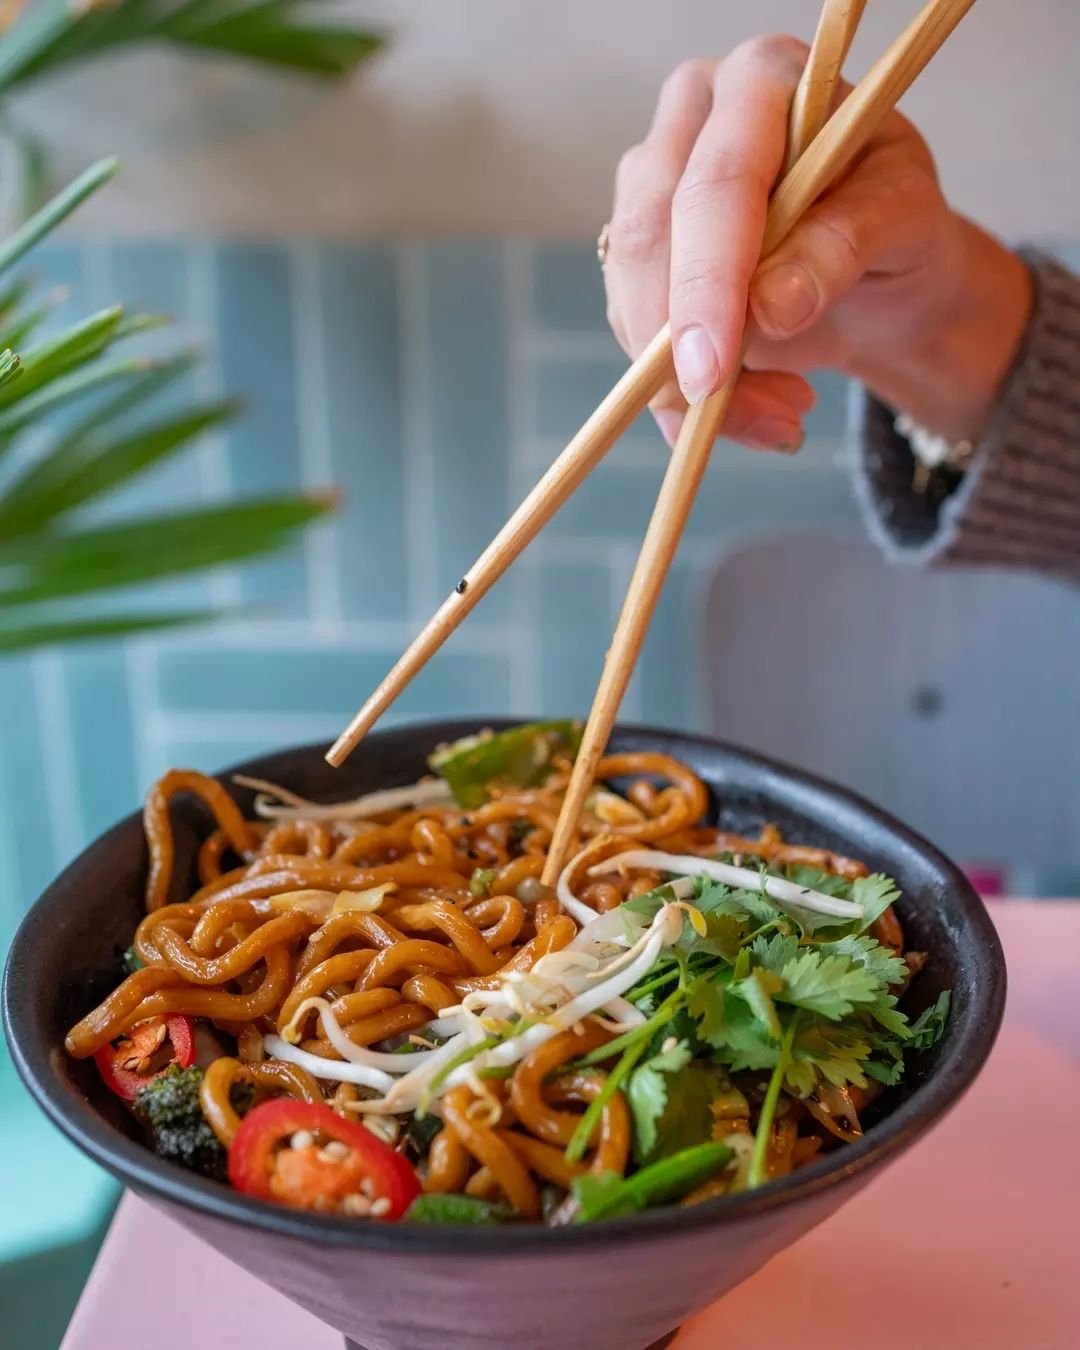 Get your lunch game on at Veganees! Choose the flavourful Shanghai fry noodles and take your taste buds on a wild ride. Lunchtime just got a whole lot more exciting! 🍜😋